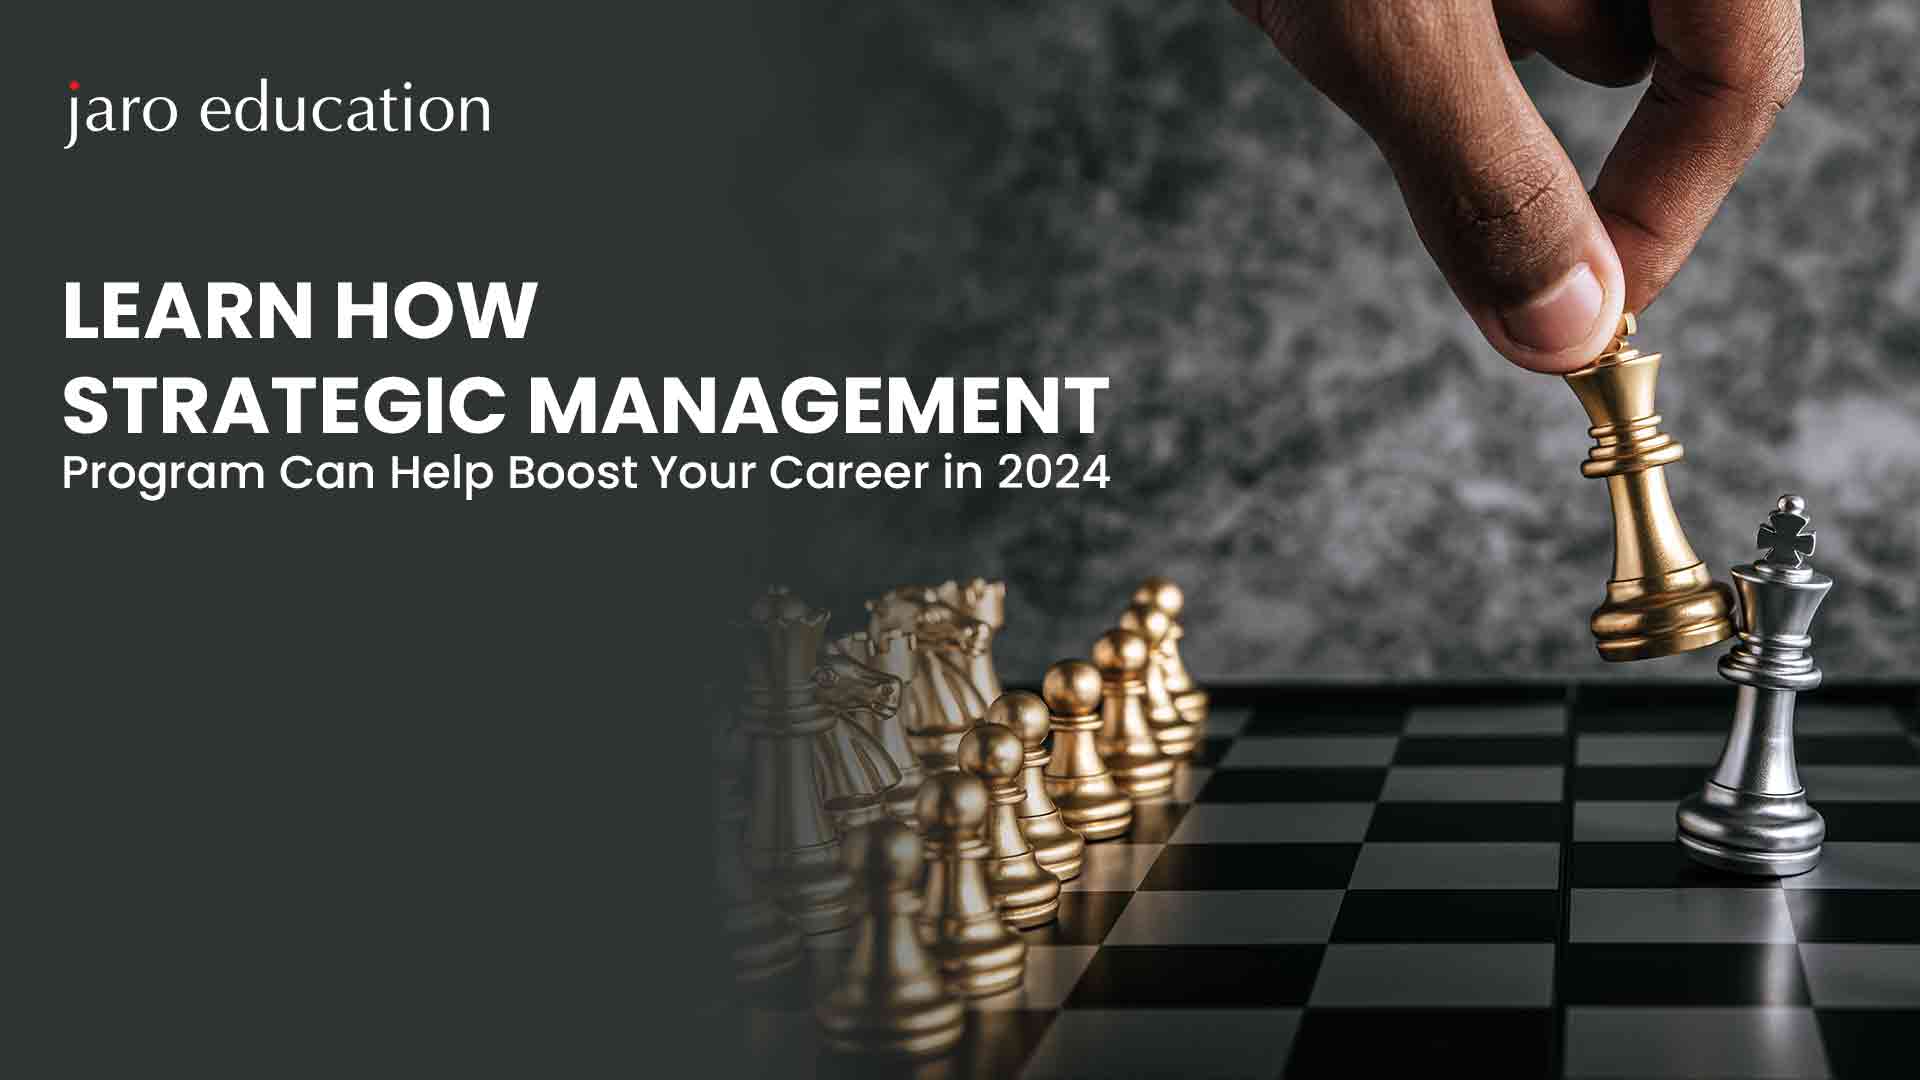 Learn How Strategic Management Program Can Help Boost Your Career in 2024